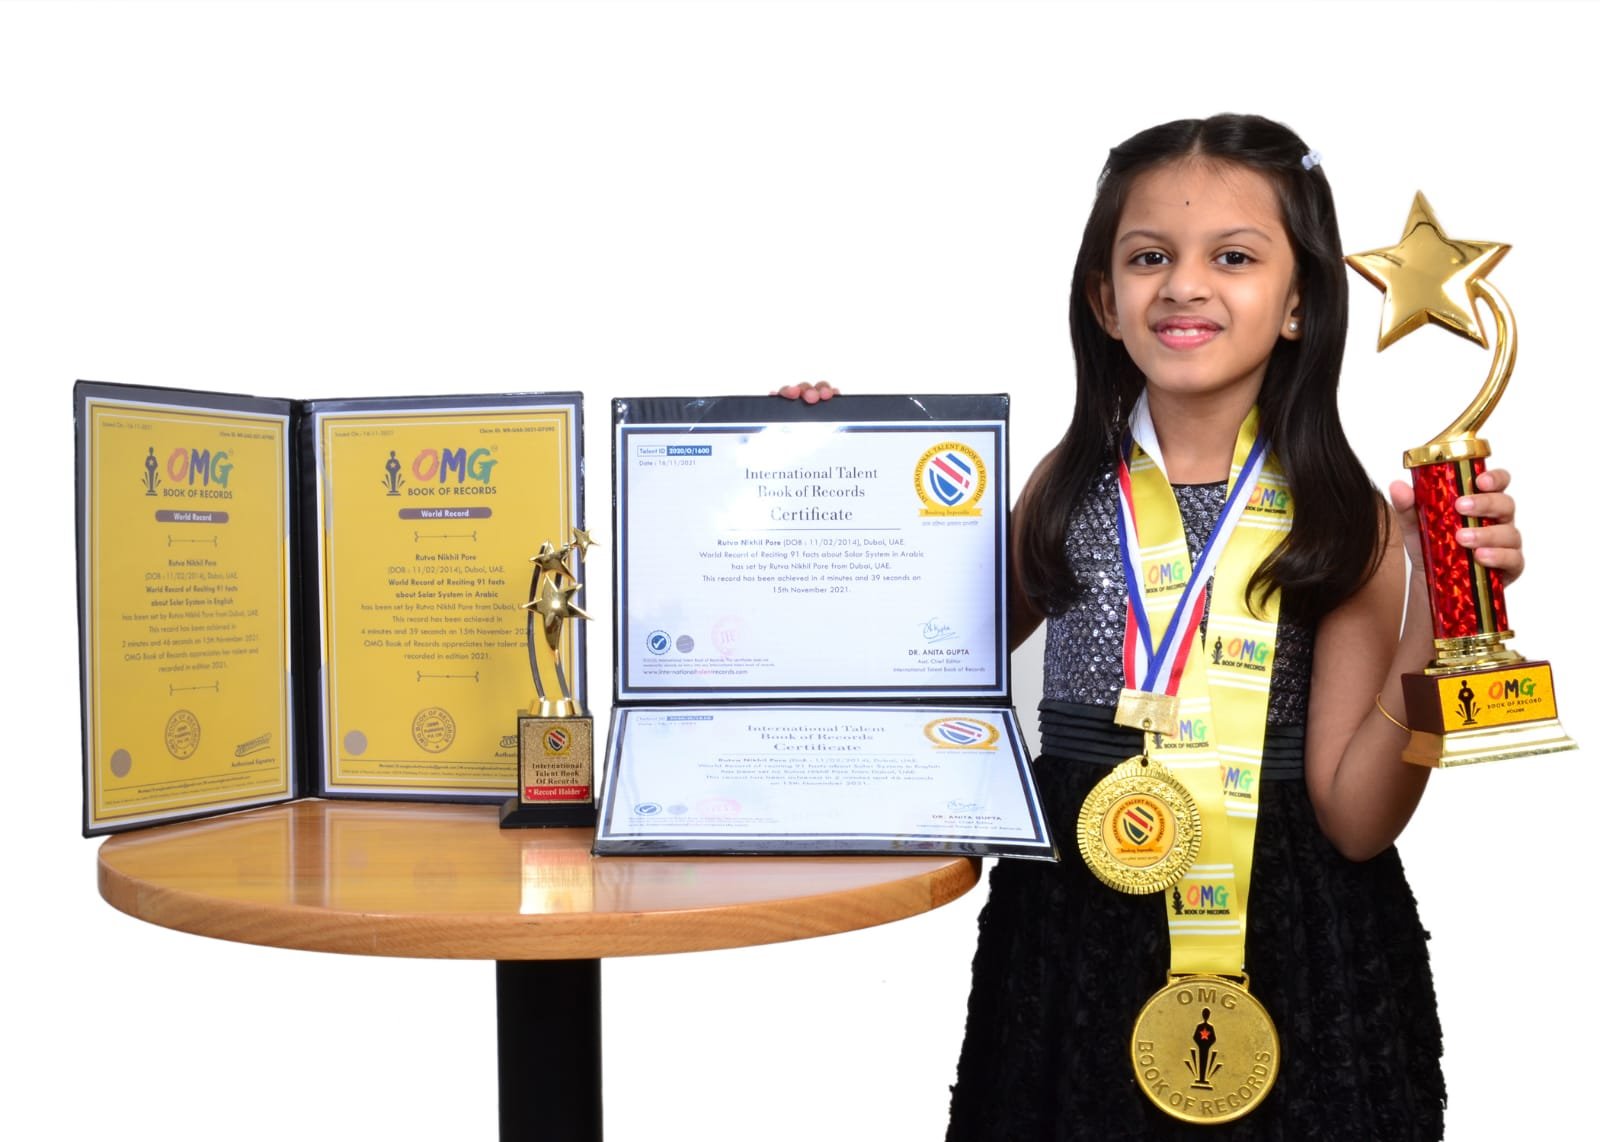 Rutva Pore, a 7-year-old Indian, UAE resident created two World Records in two languages (English and Arabic) in one attempt